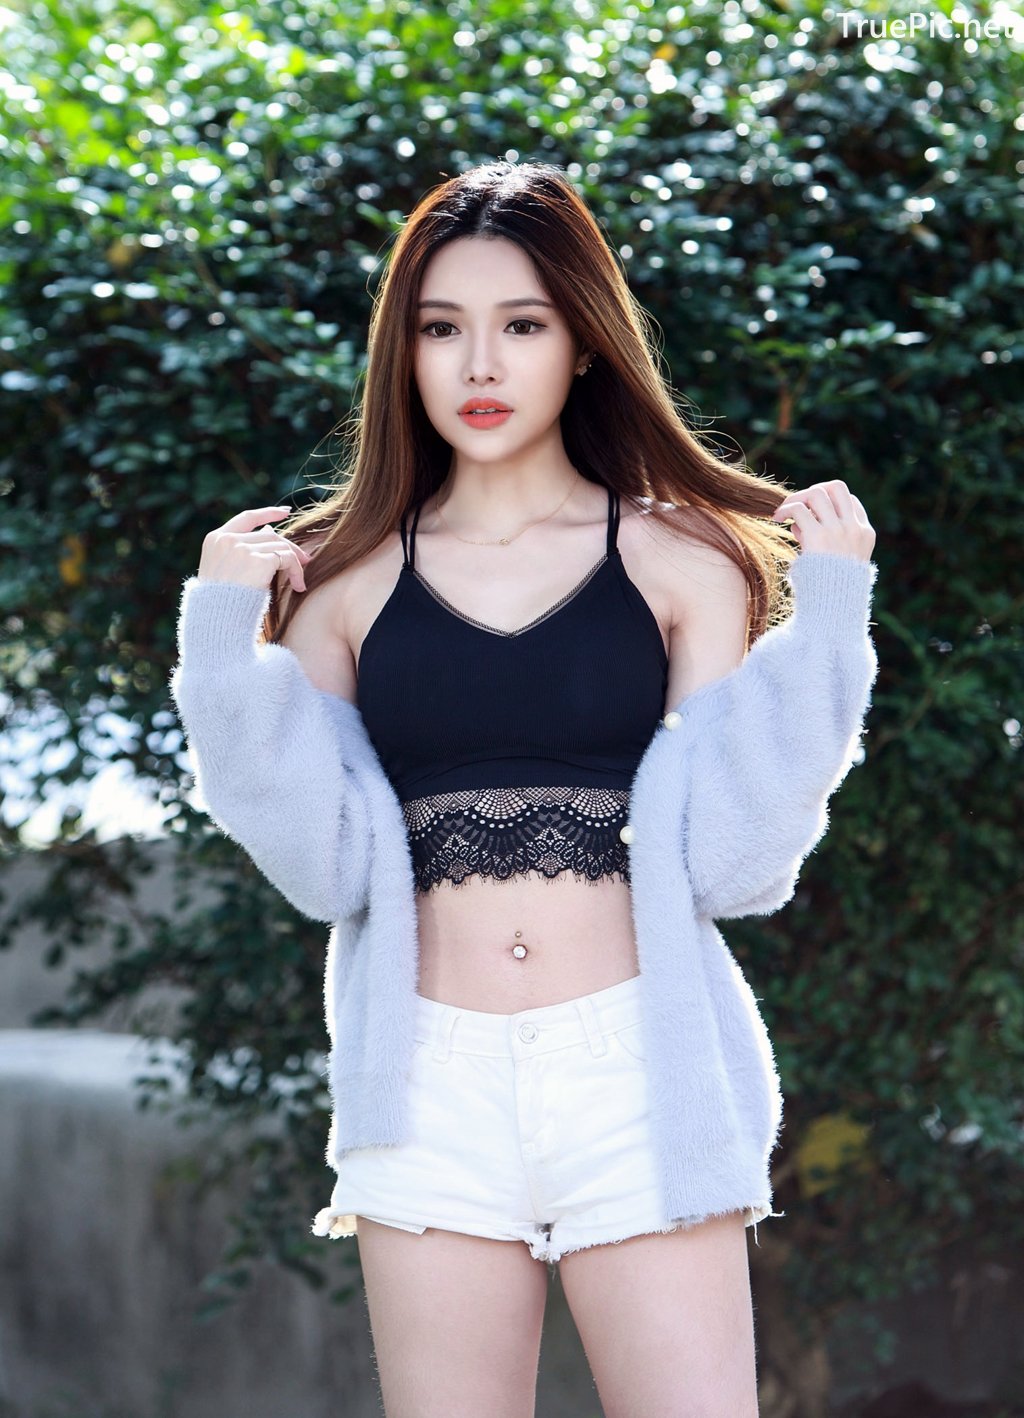 Image-Taiwanese-Model–莊舒潔–Hot-White-Short-Pants-and-Black-Crop-Top-TruePic.net- Picture-22